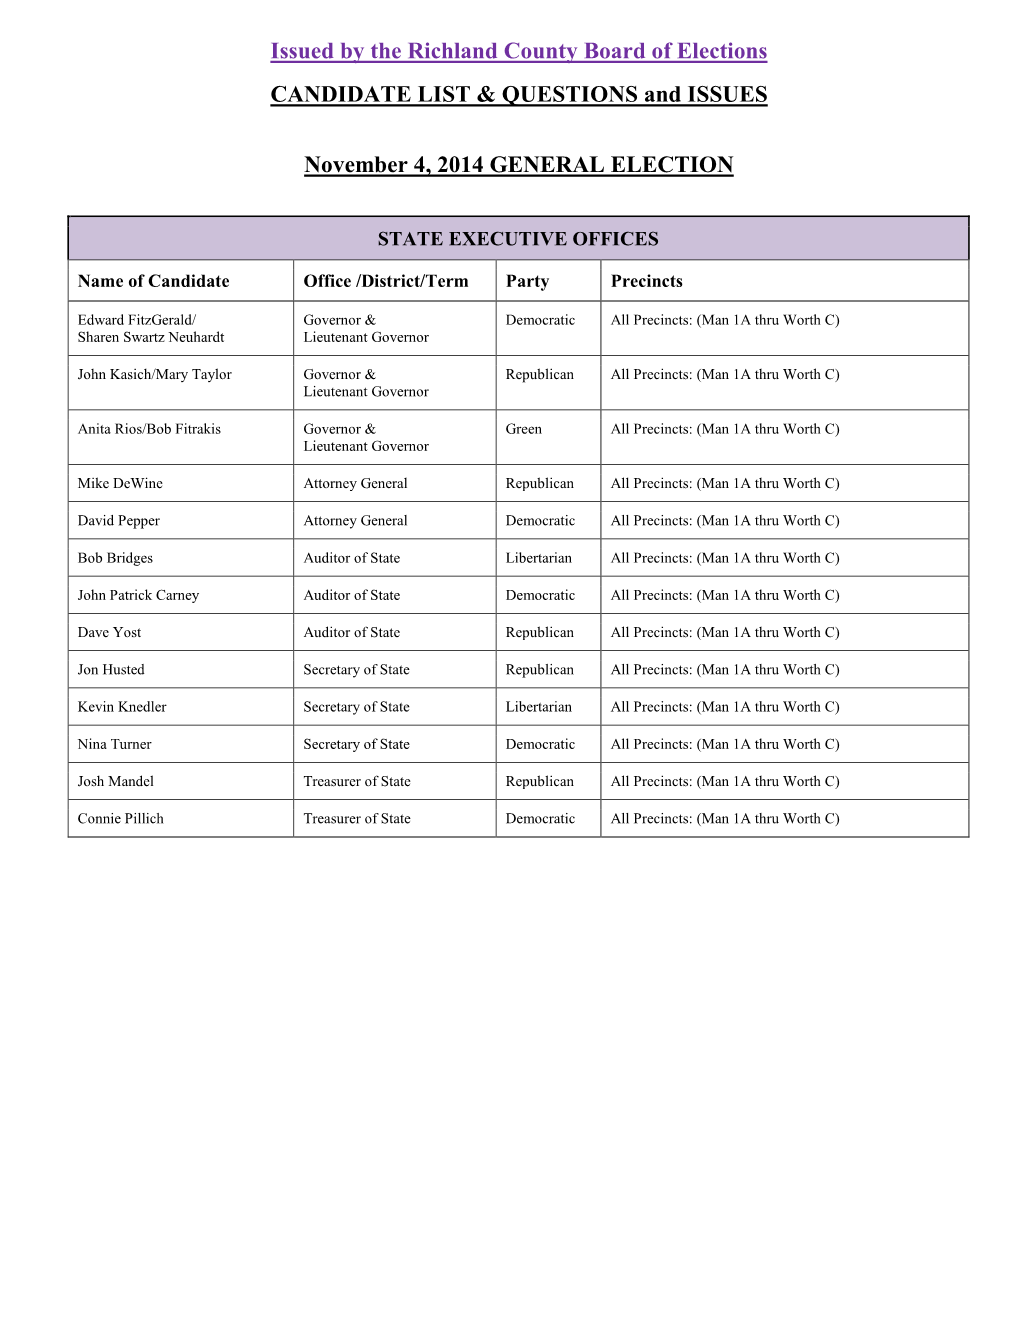 Issued by the Richland County Board of Elections CANDIDATE LIST & QUESTIONS and ISSUES